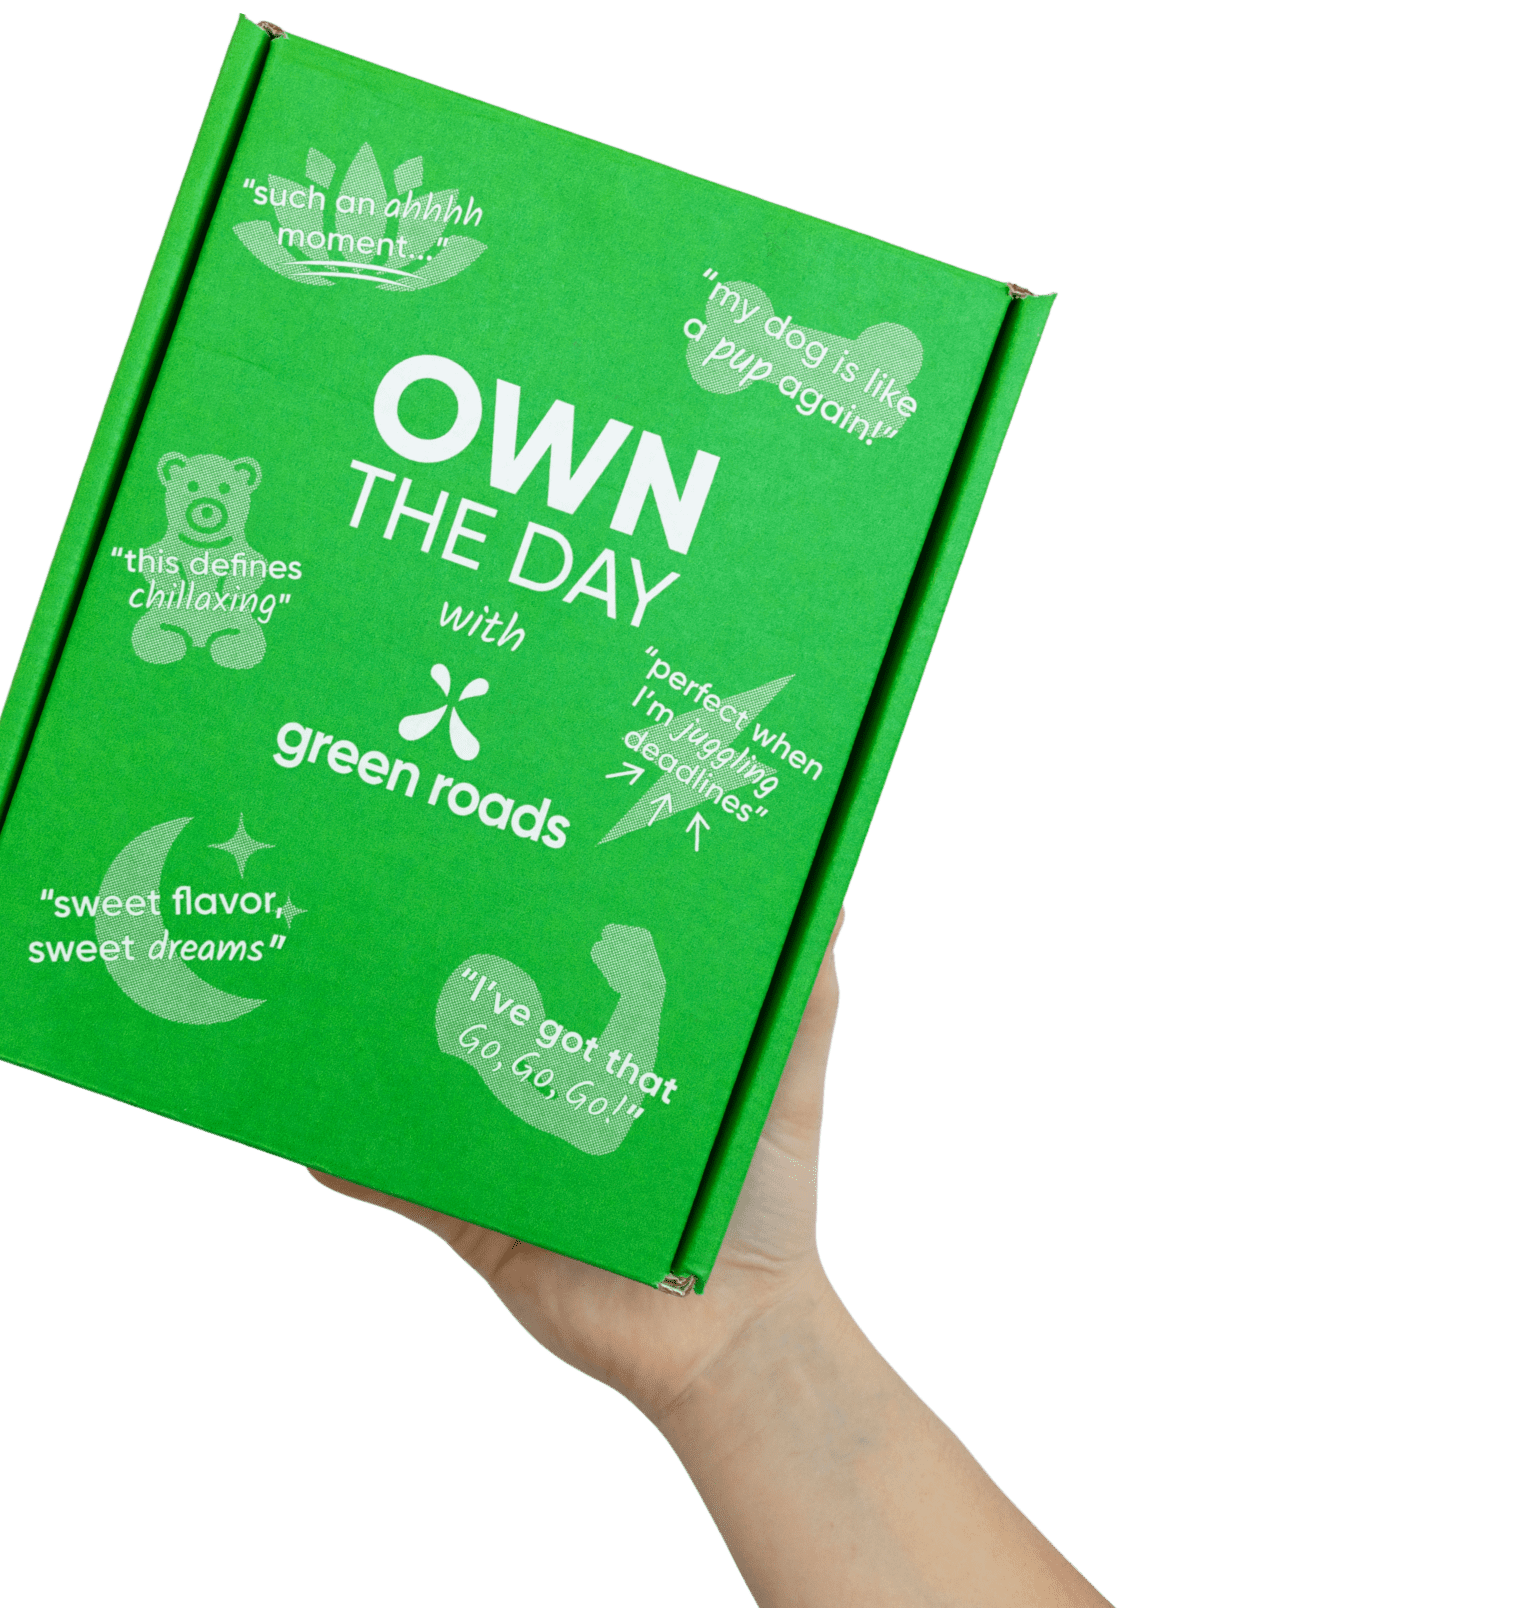 Green Roads Own The Day package